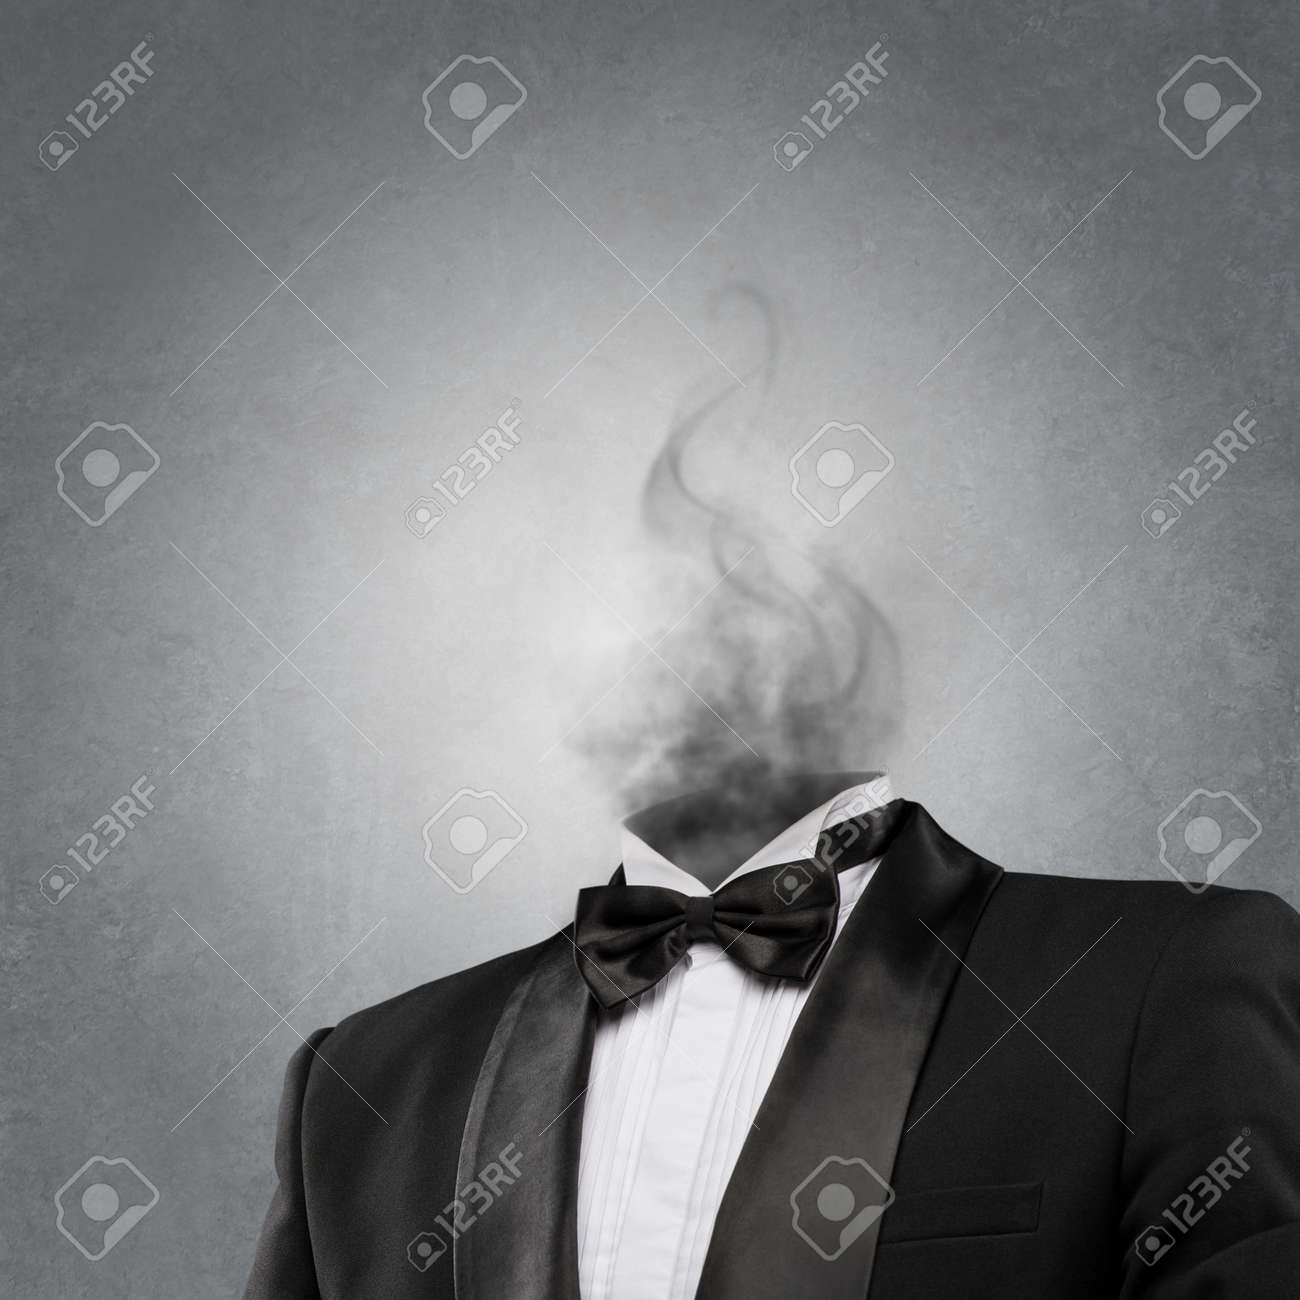 29711693-Overworked-burnout-business-man-standing-headless-with-smoke-instead-of-his-head-Strong-stress-conce-Stock-Photo.jpg